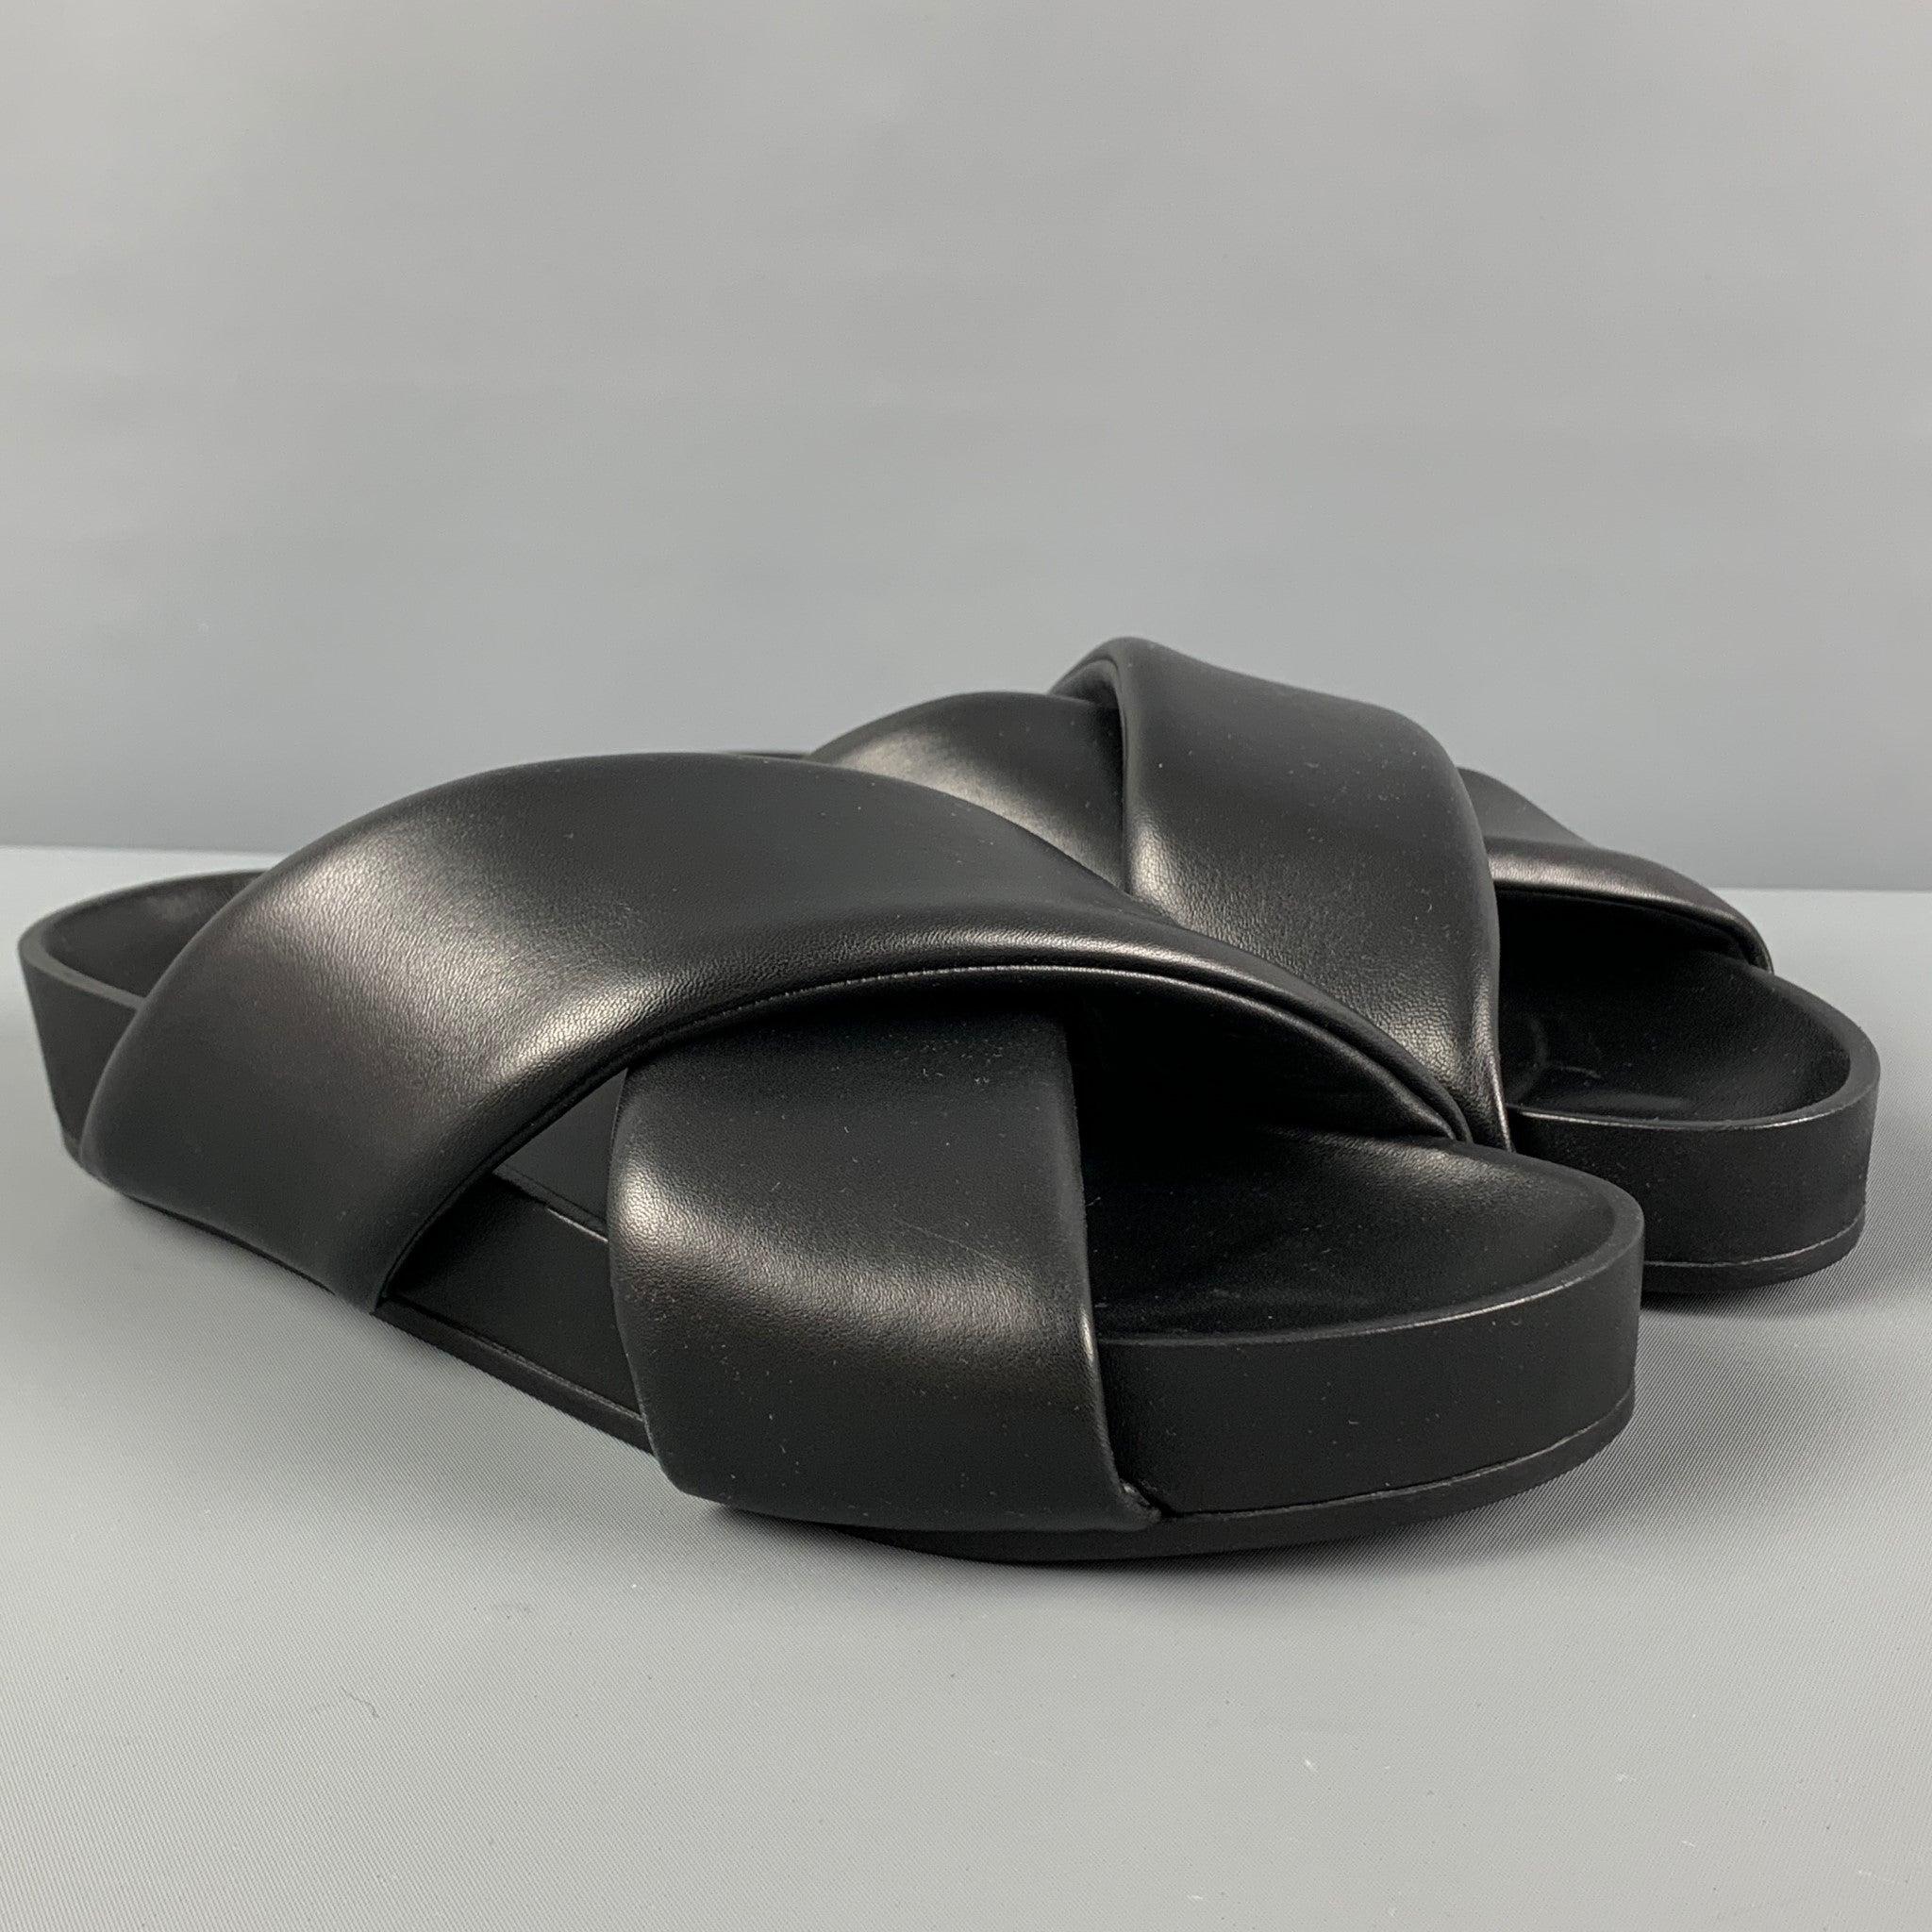 JIL SANDER sandals comes in a black leather featuring a wide criss cross strap design and a slip on style. Made in Italy.
 New With Box.
  
 

 Marked:  43Outsole: 11.25 inches x 4 inches 
  
  
  
 Sui Generis Reference: 121151
 Category: Sandals
